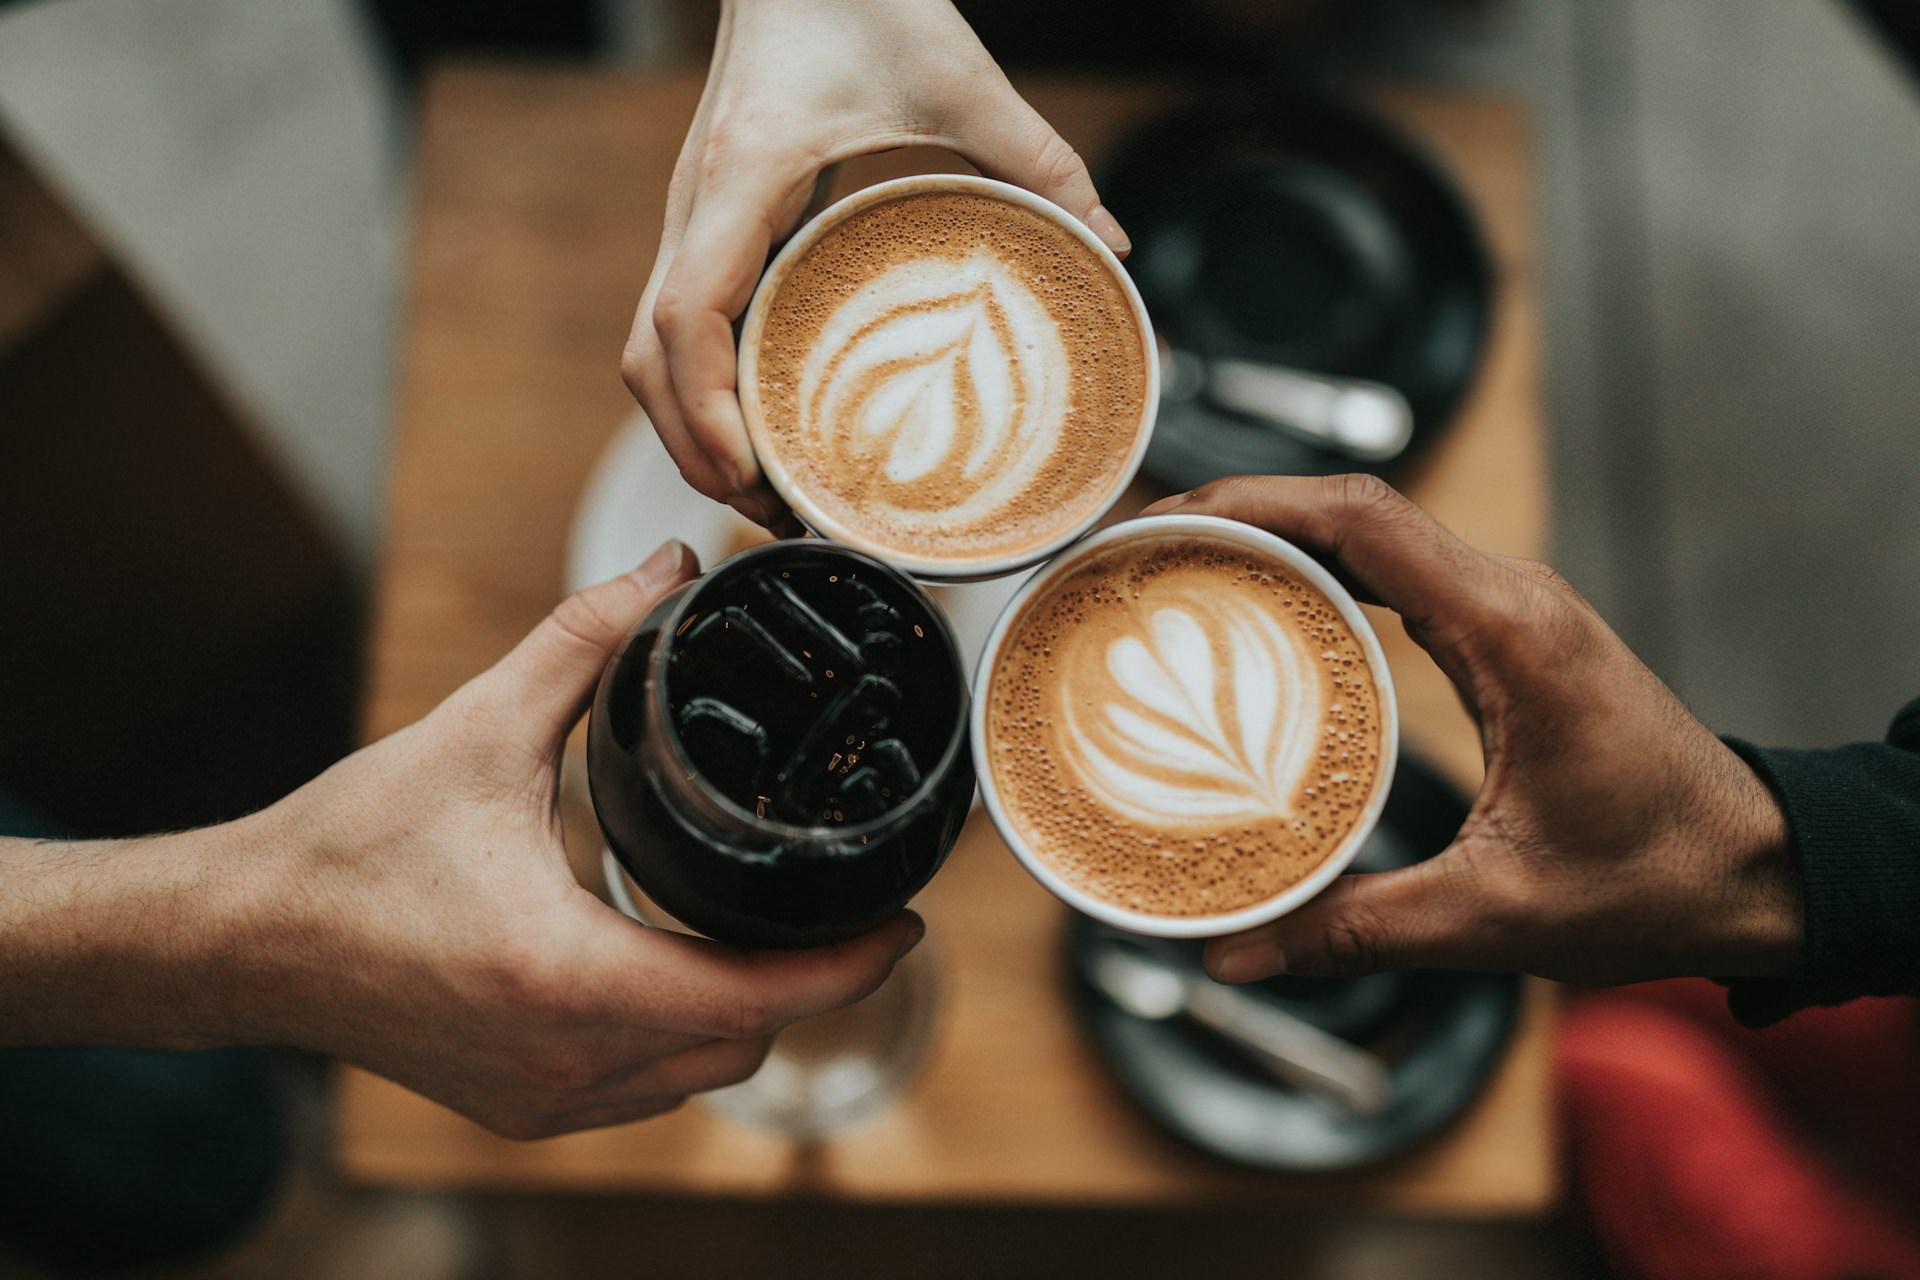 While coffee is widely embraced as a beloved morning ritual, it is essential to recognize its true nature – it is the most widely consumed recreational substance and <a href="https://www.webmd.com/diet/caffeine-myths-and-facts" rel="noreferrer">it is an addictive substance</a>.